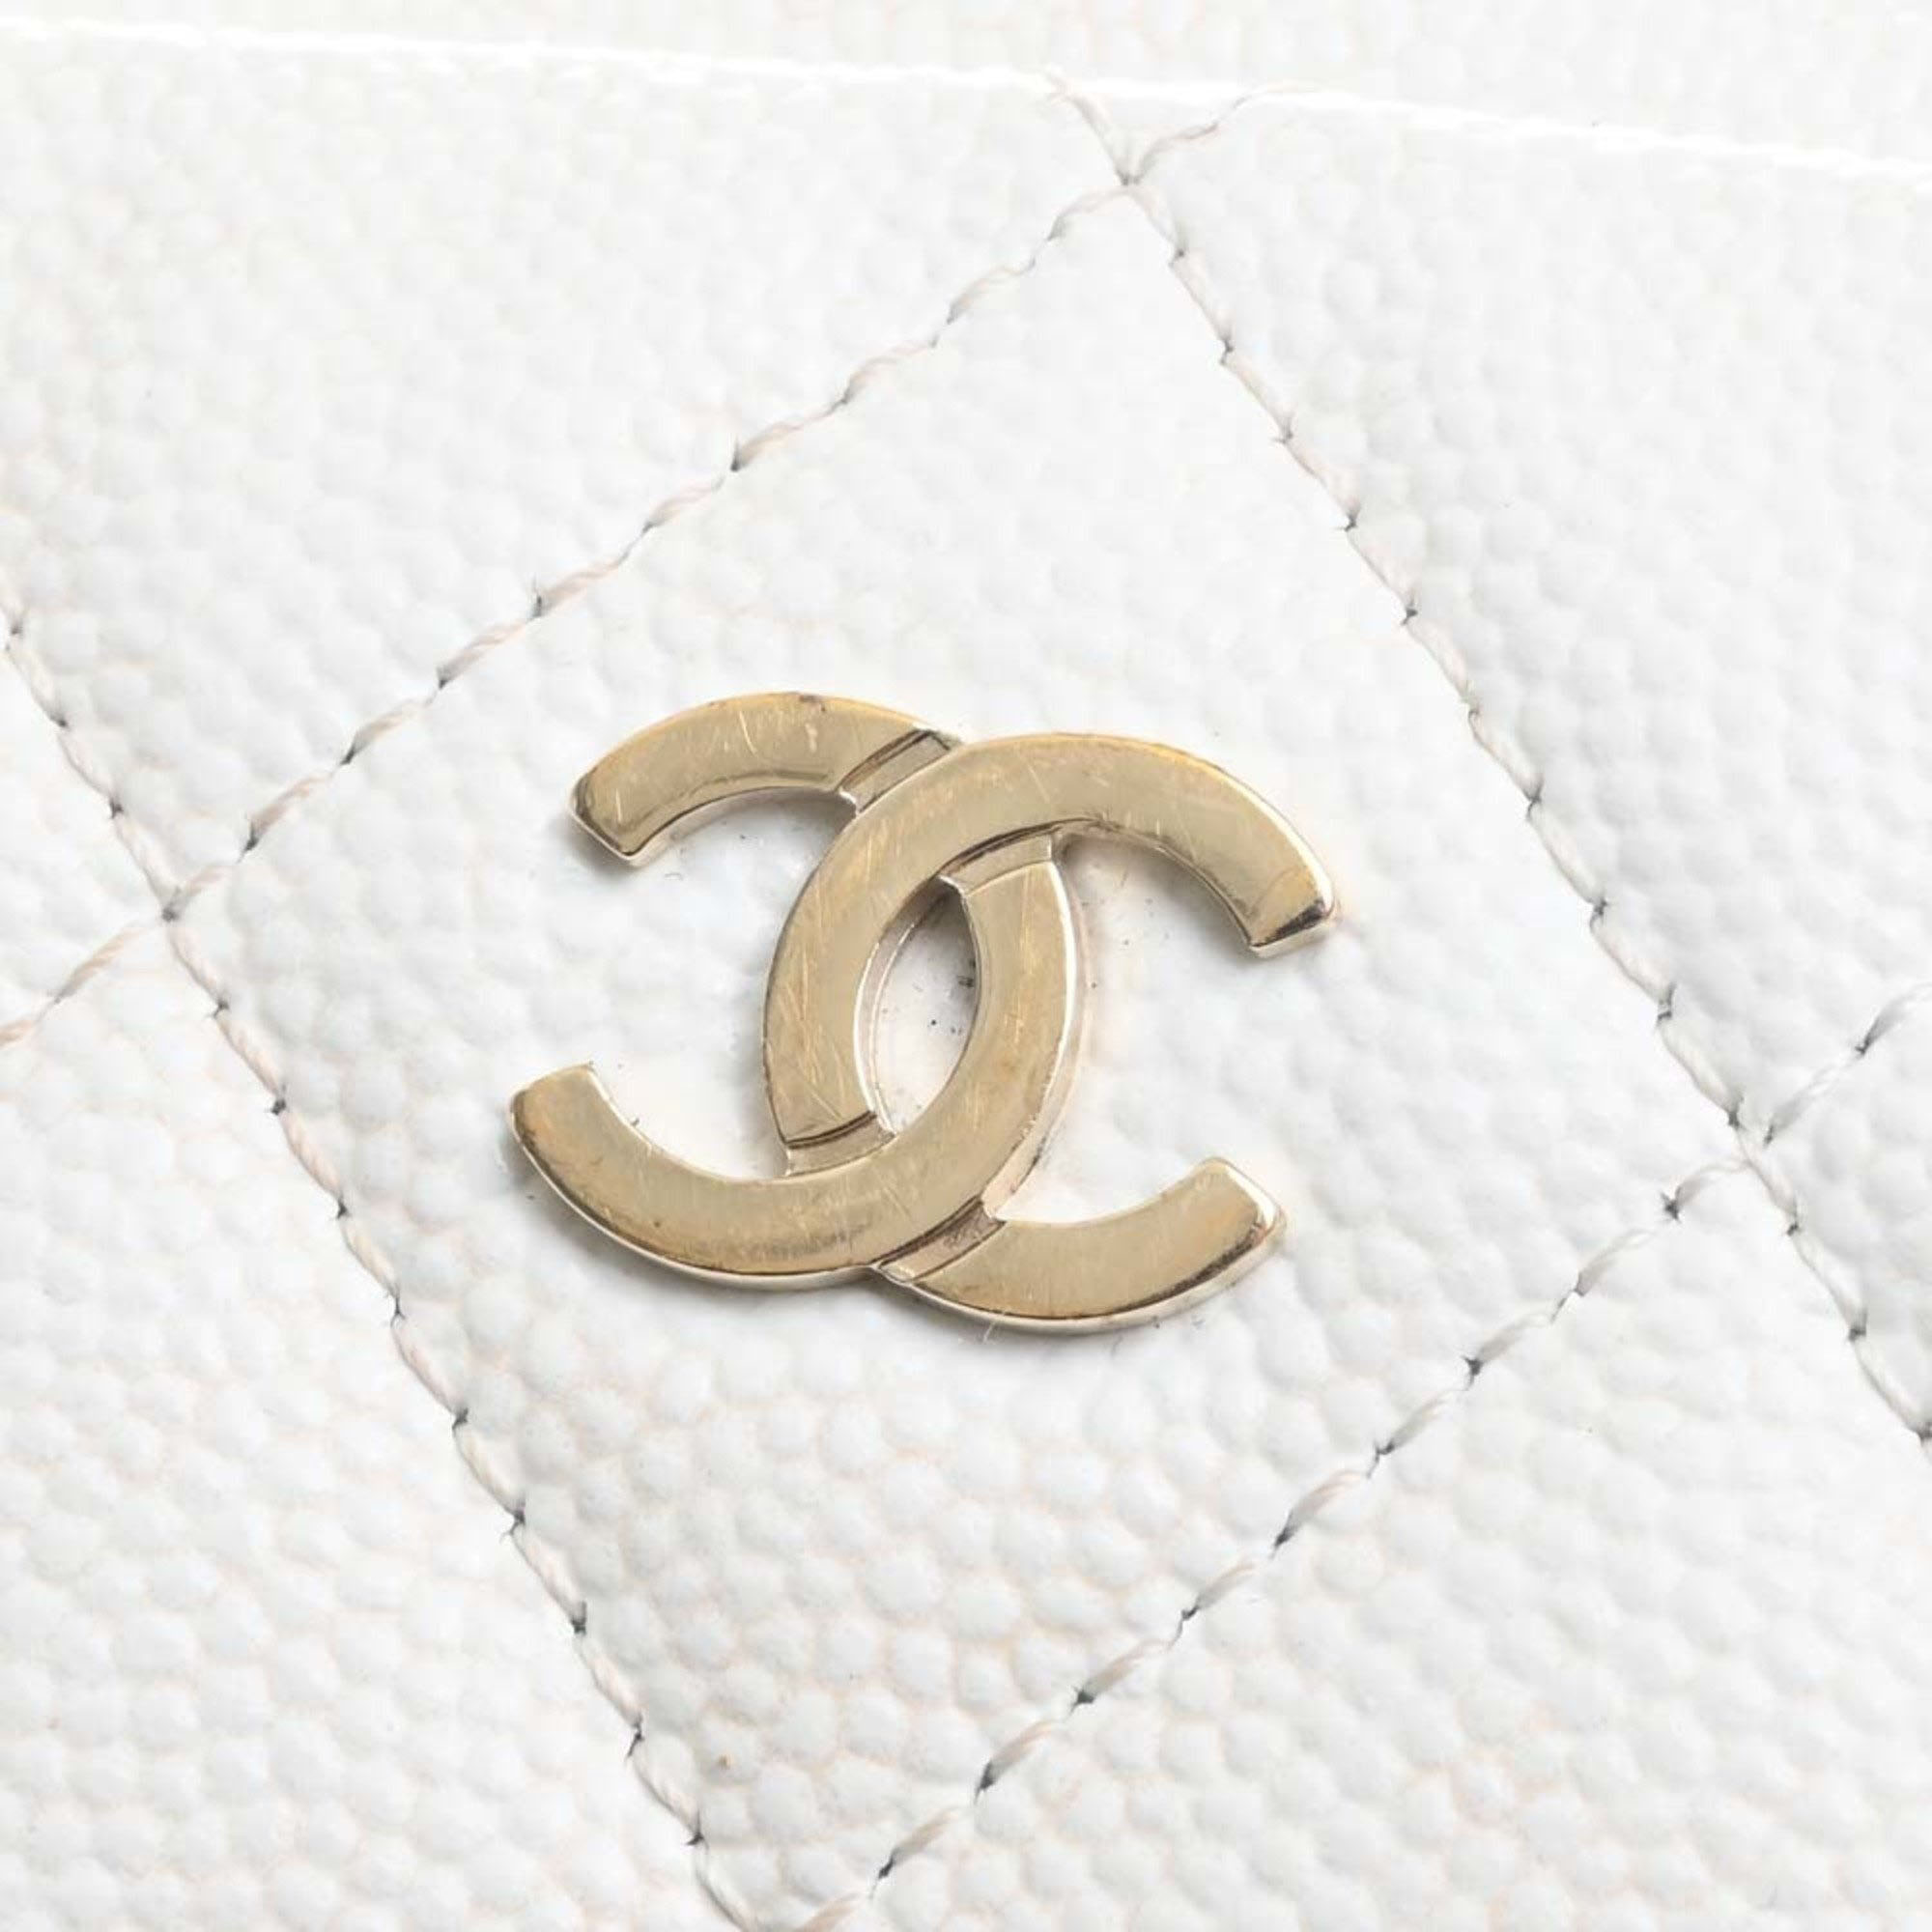 Chanel White Leather CC Timeless Pouch